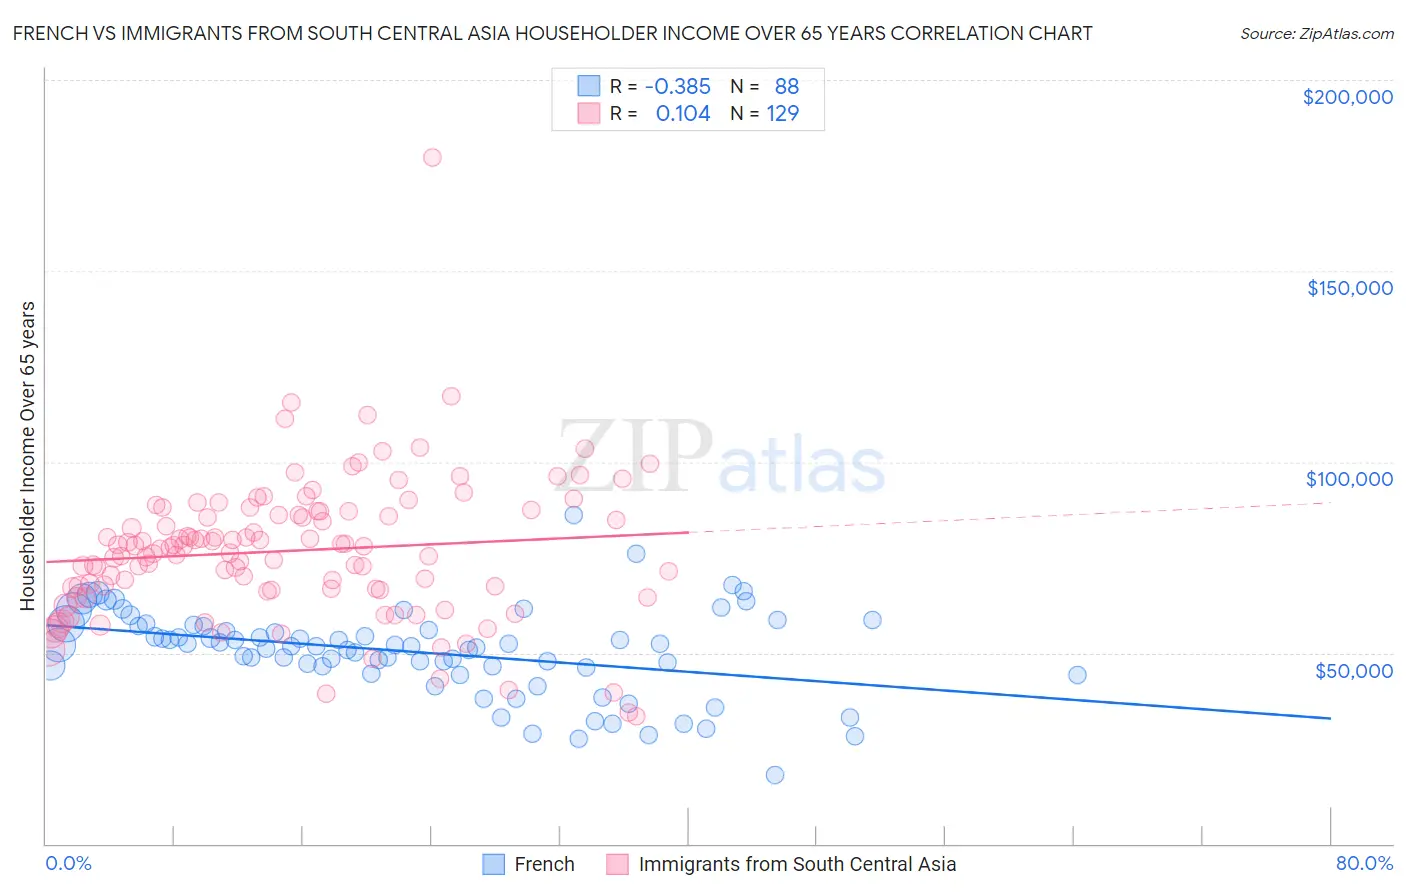 French vs Immigrants from South Central Asia Householder Income Over 65 years